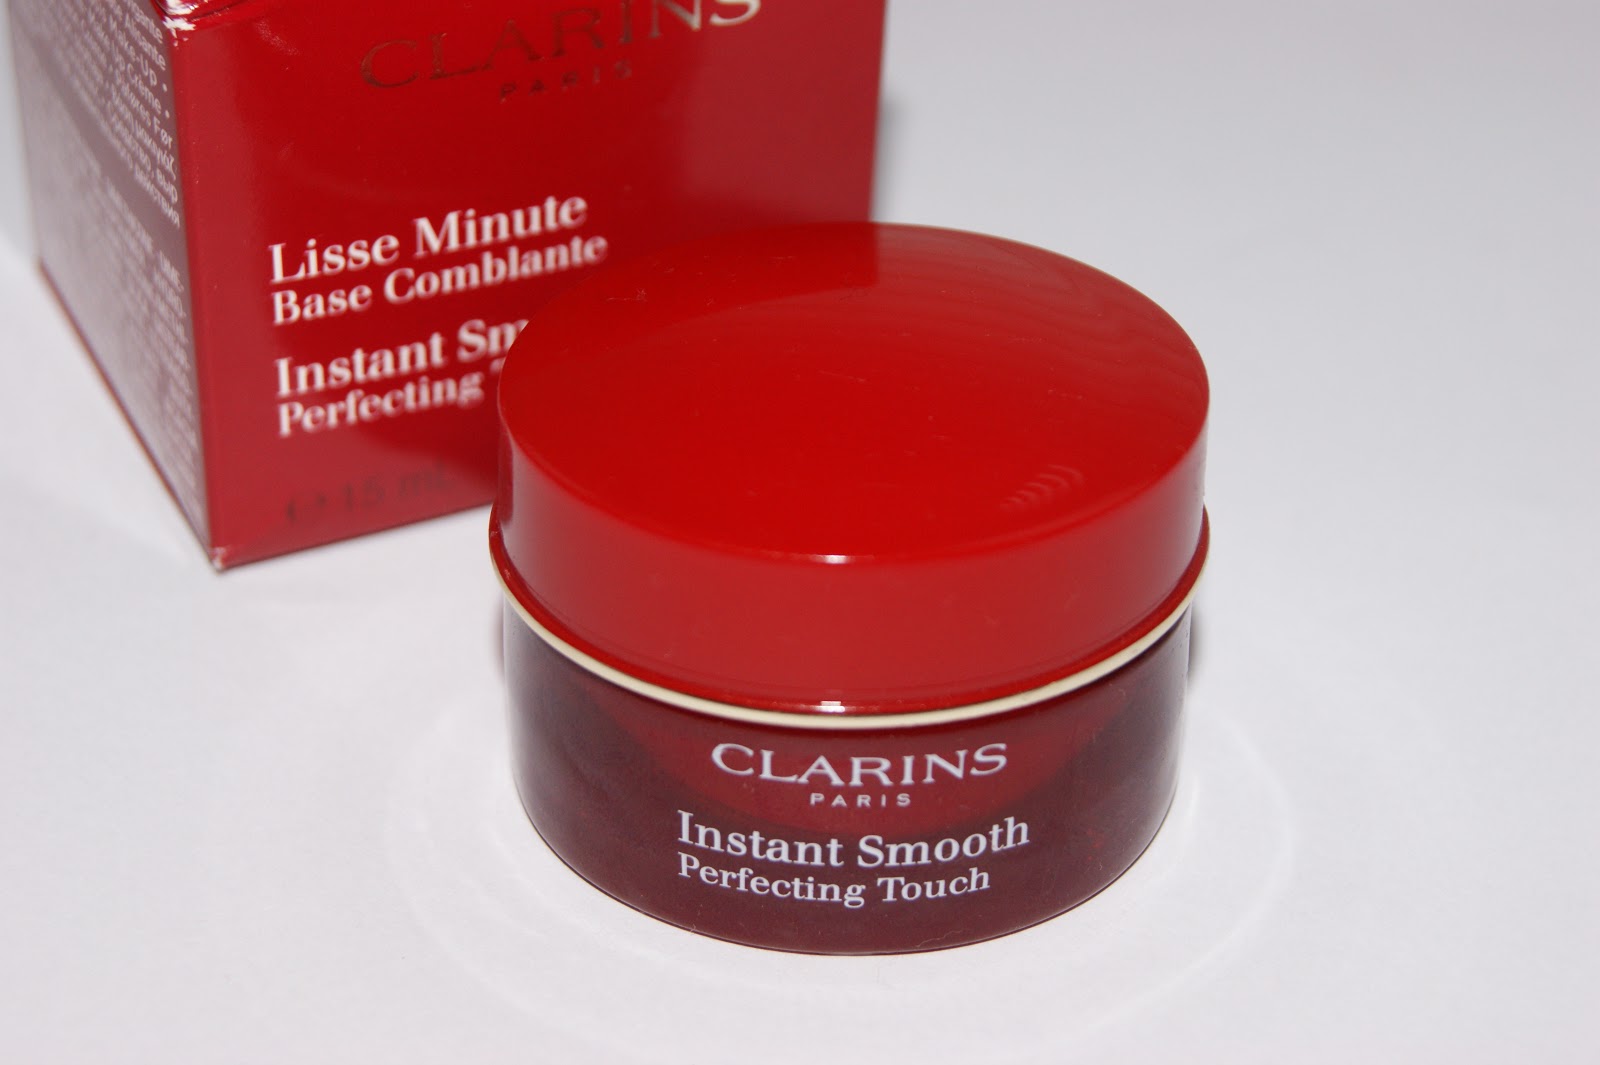 er mere end magnet Regulering Clarins Instant Smooth Perfecting Touch Primer - Review | The Sunday Girl